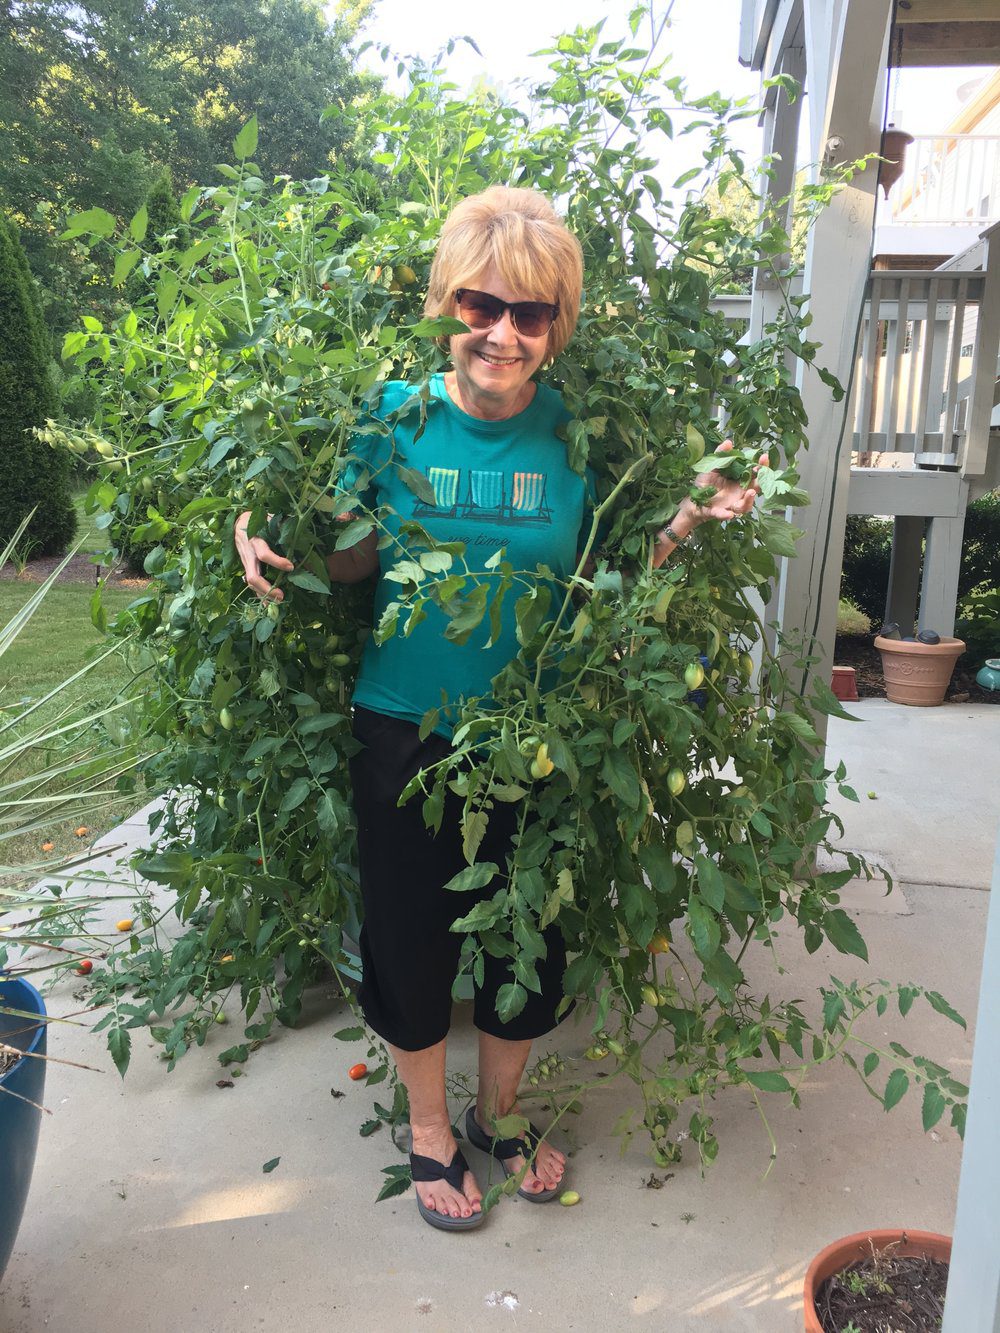 Donna Fox is happy in her garden, and why not? She